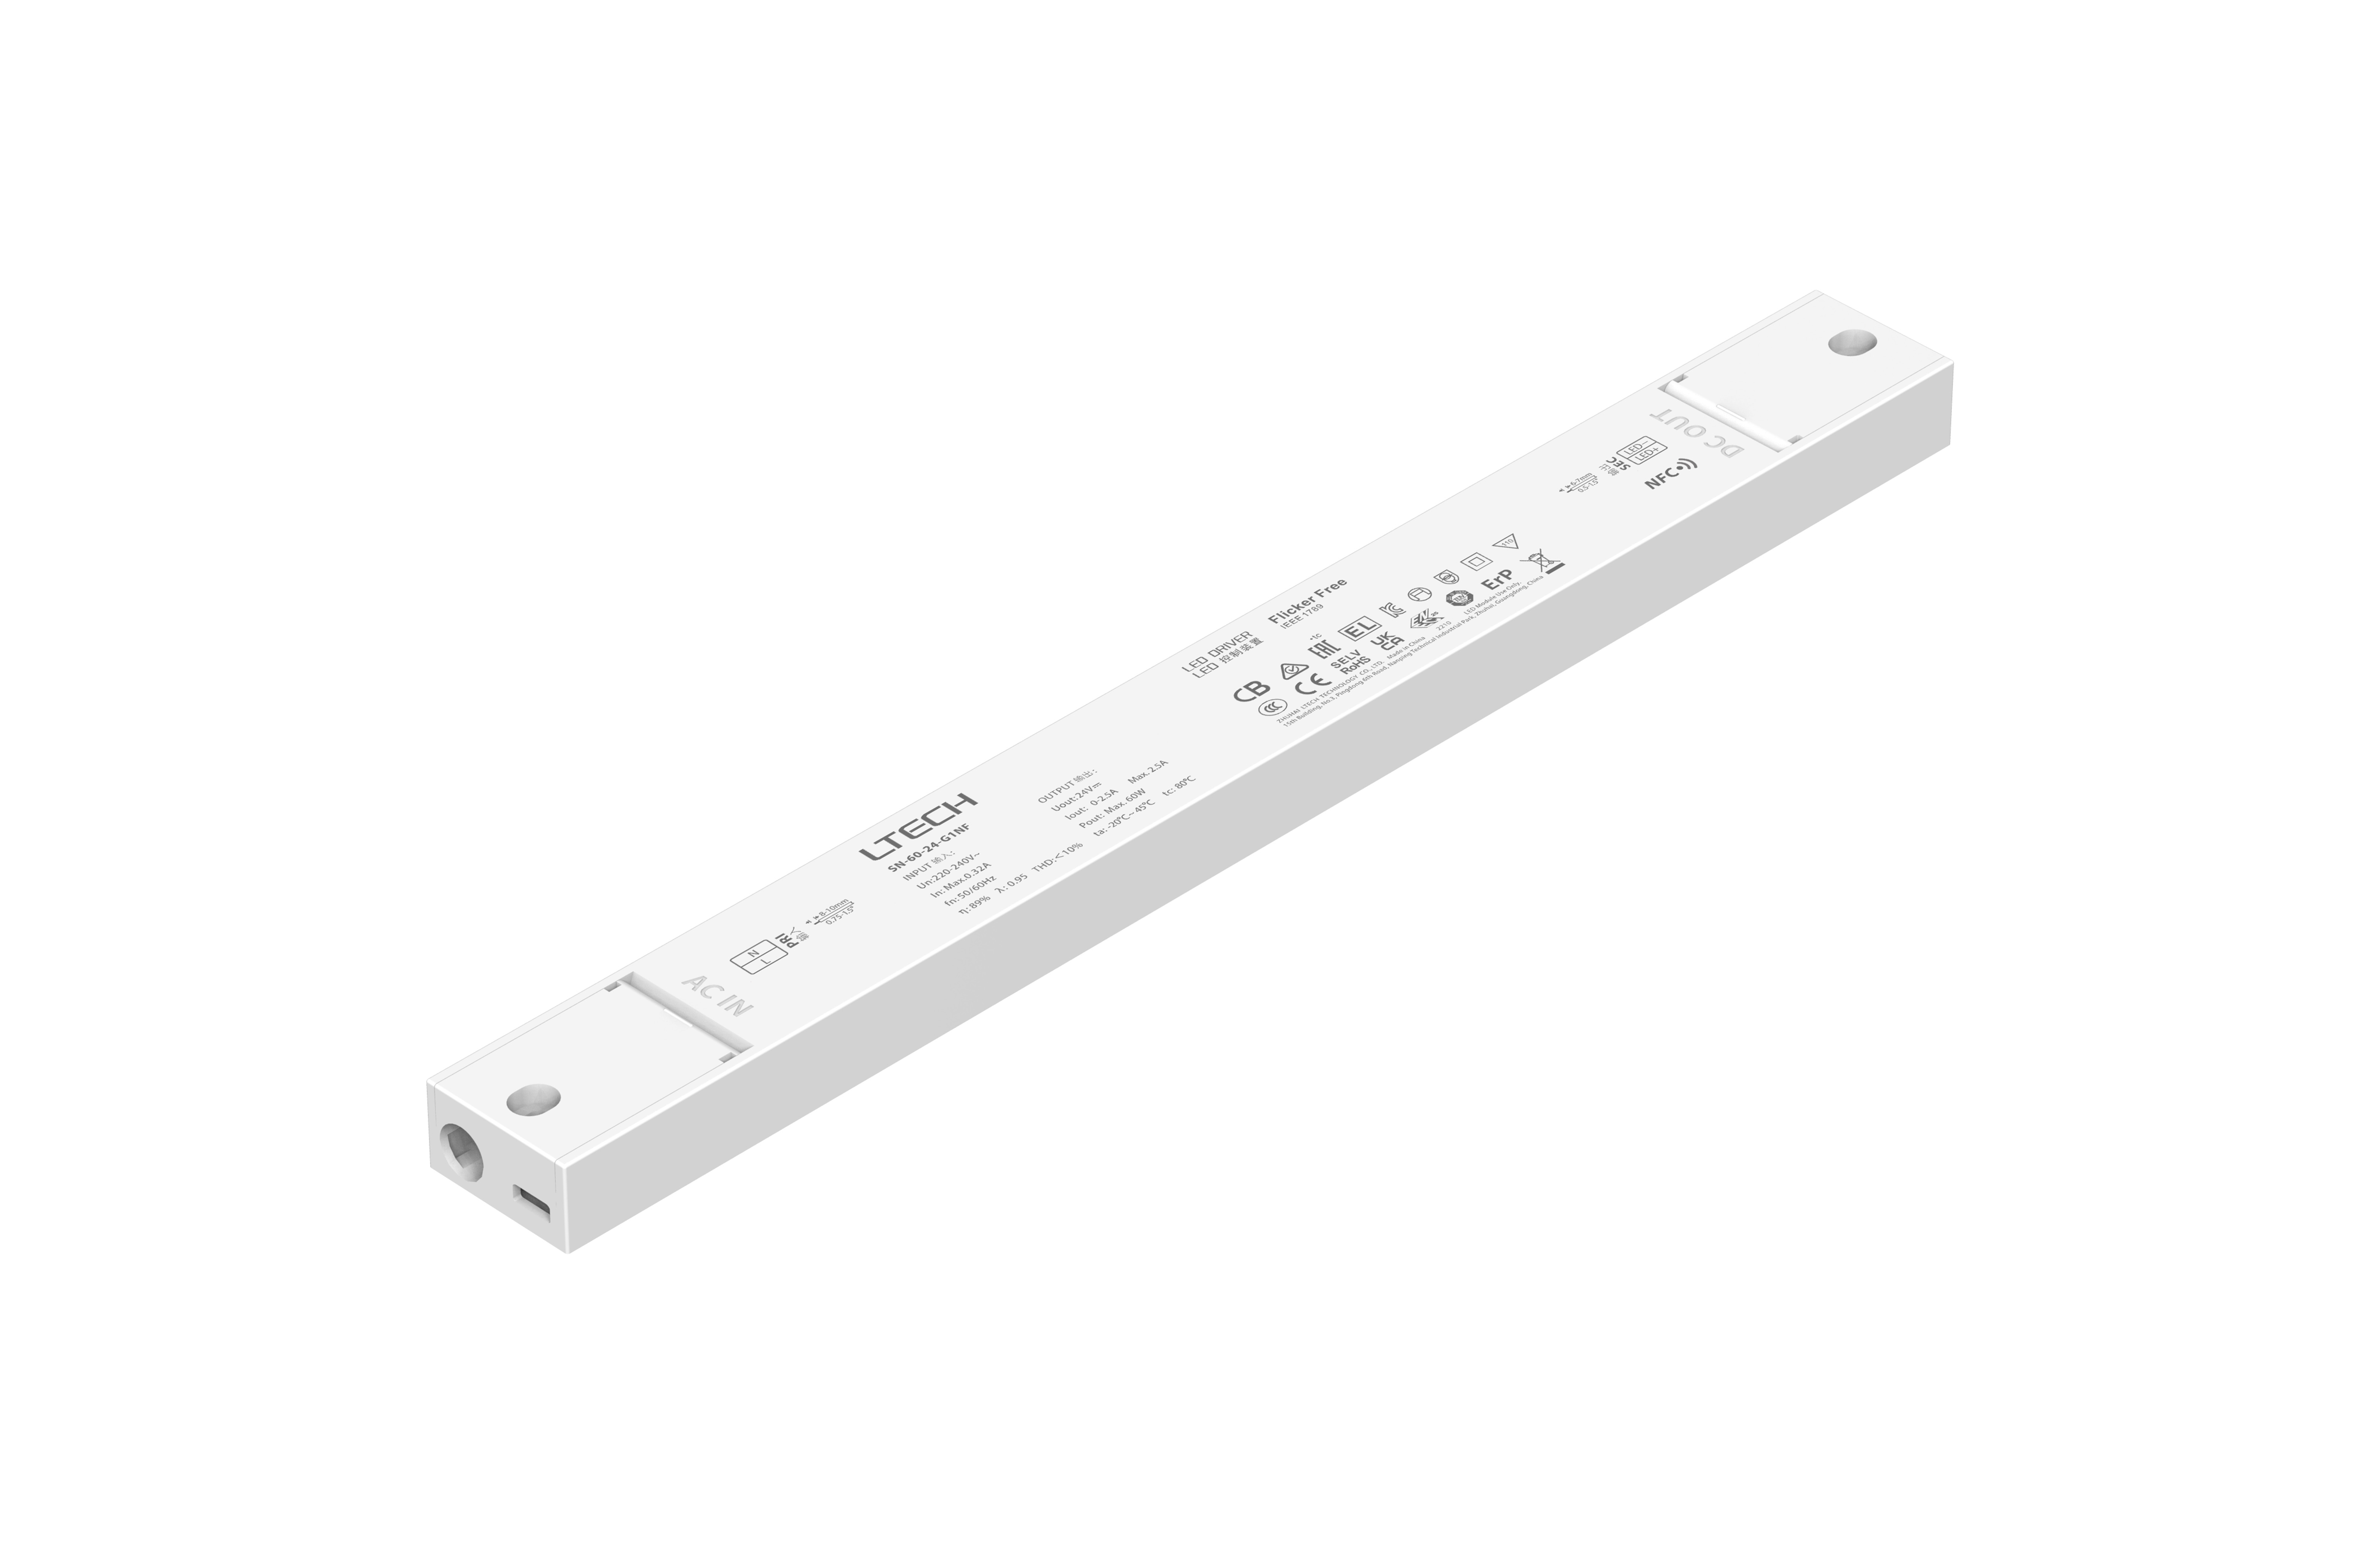 SN-60-24-G1NF-NFC  Intelligent Constant Current NFC ON/OFF LED Driver;  60W; 24VDC 2.5A ; 220-240Vac; IP20; 5yrs Warrenty.